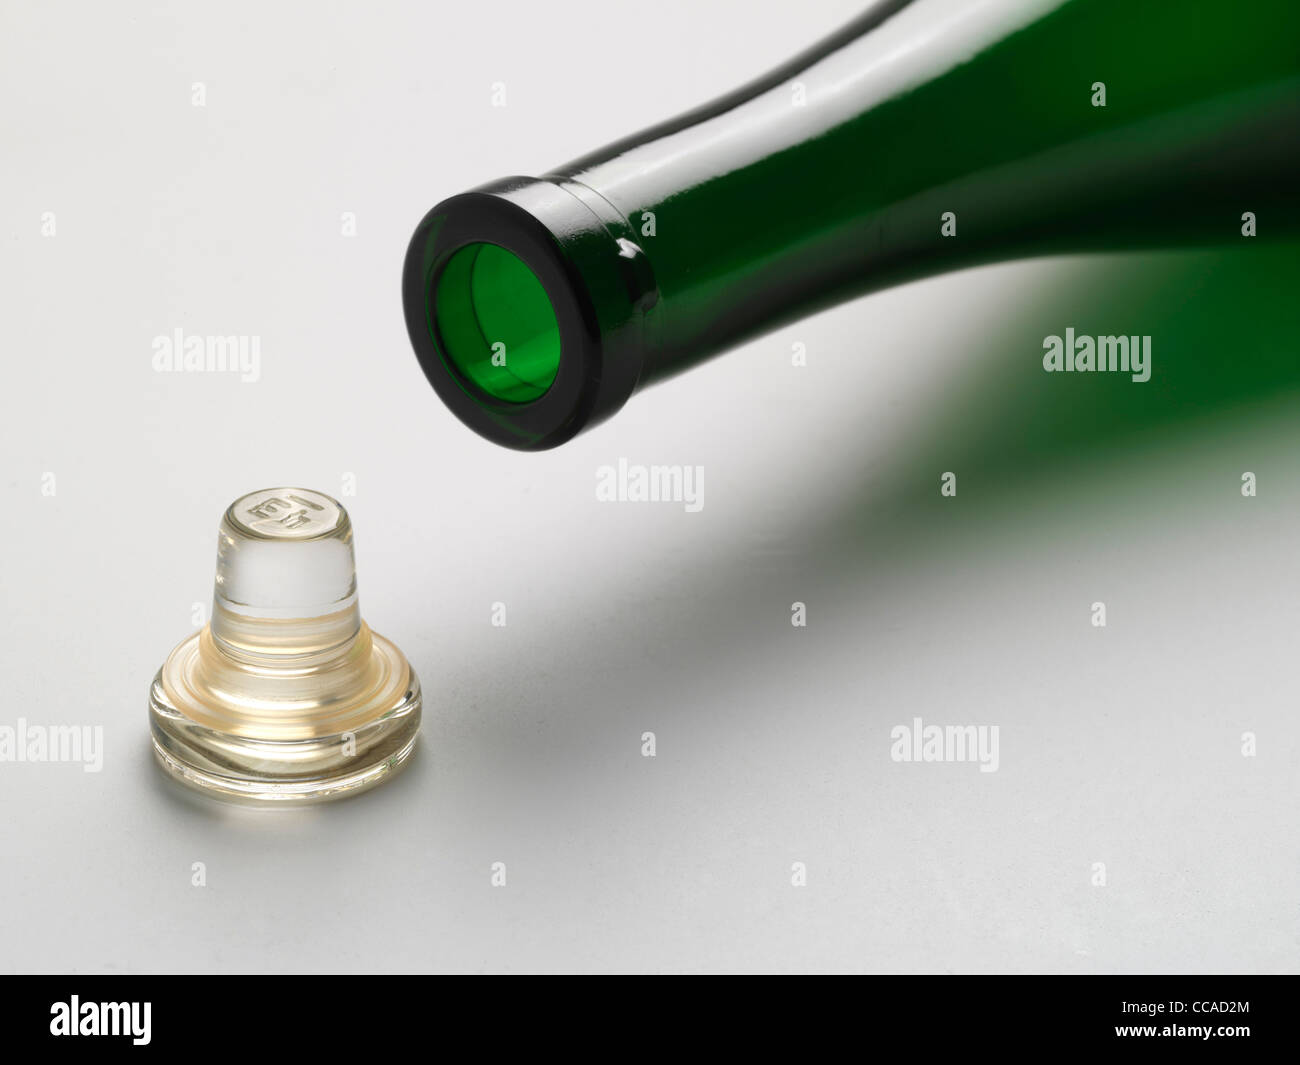 Glass wine bottle stopper, which replaces the traditional cork stopper. Stock Photo